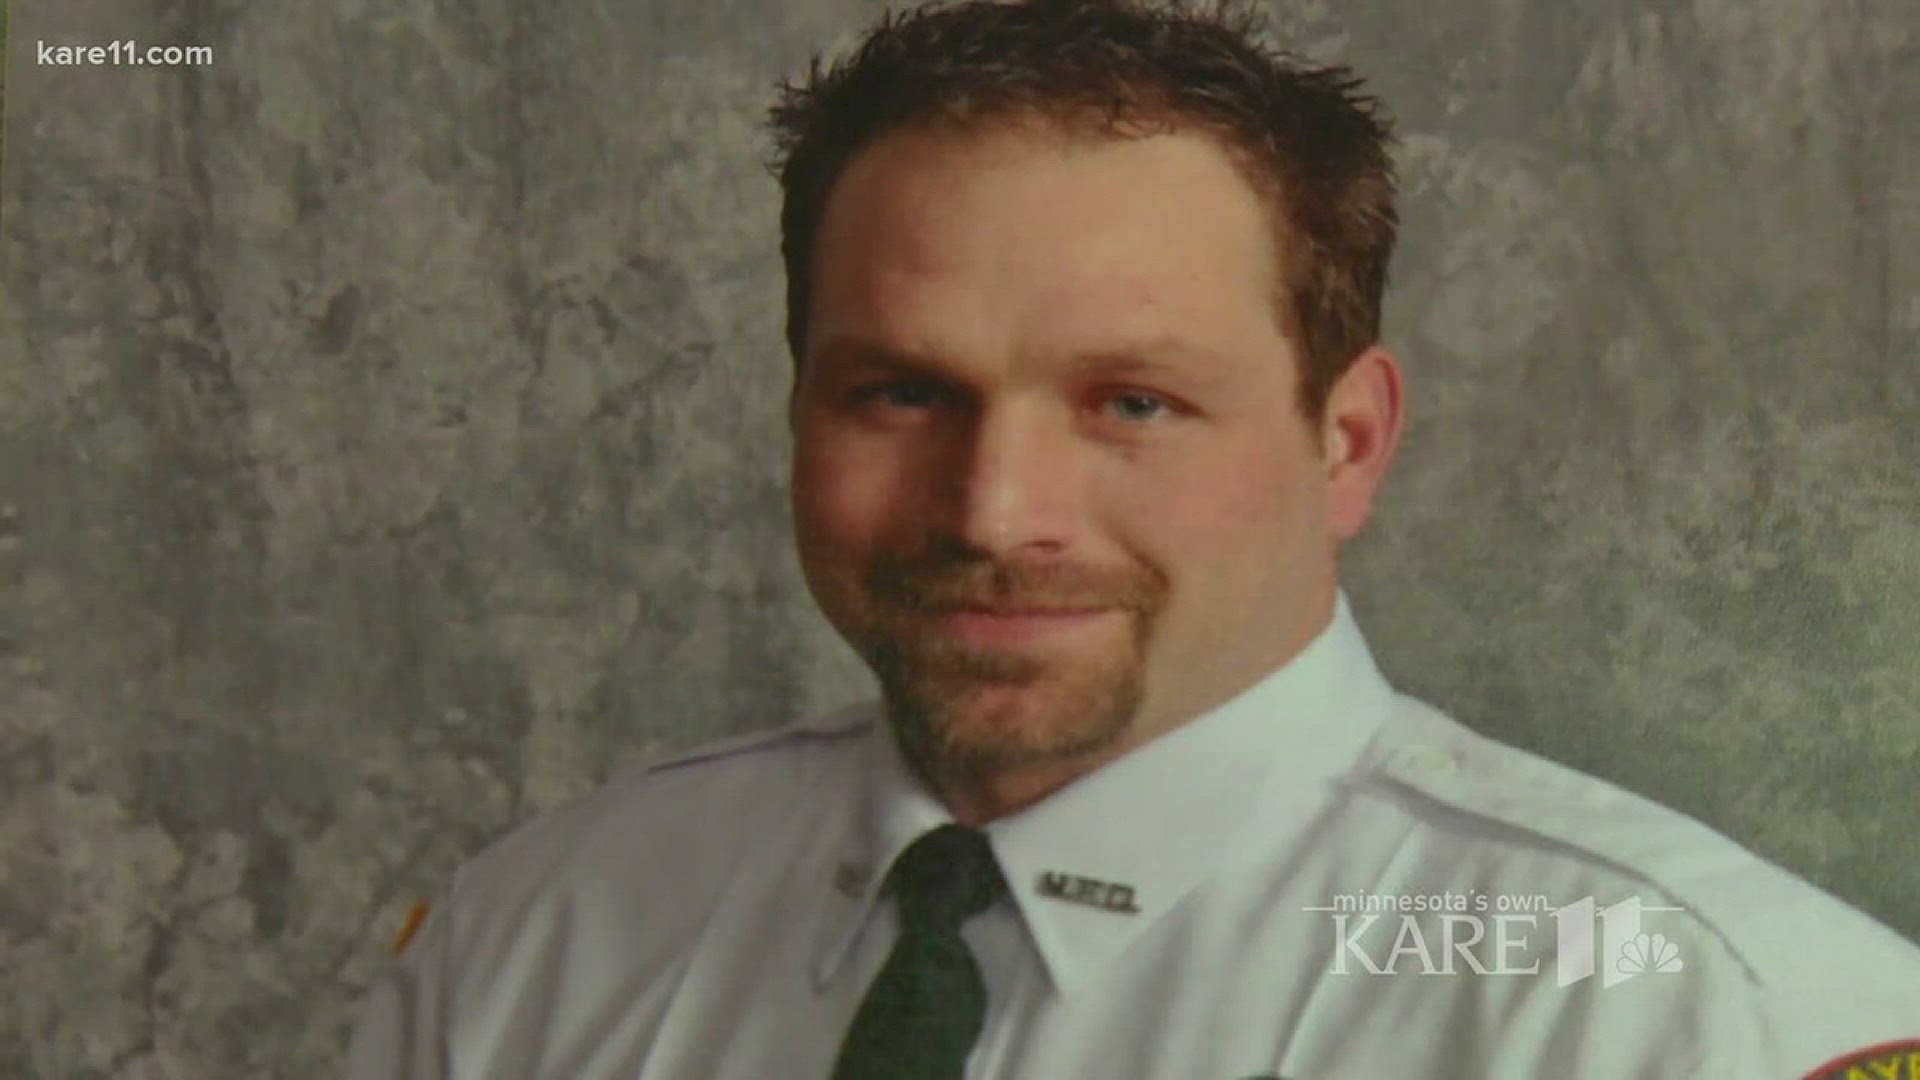 Firefighter dies after training exercise